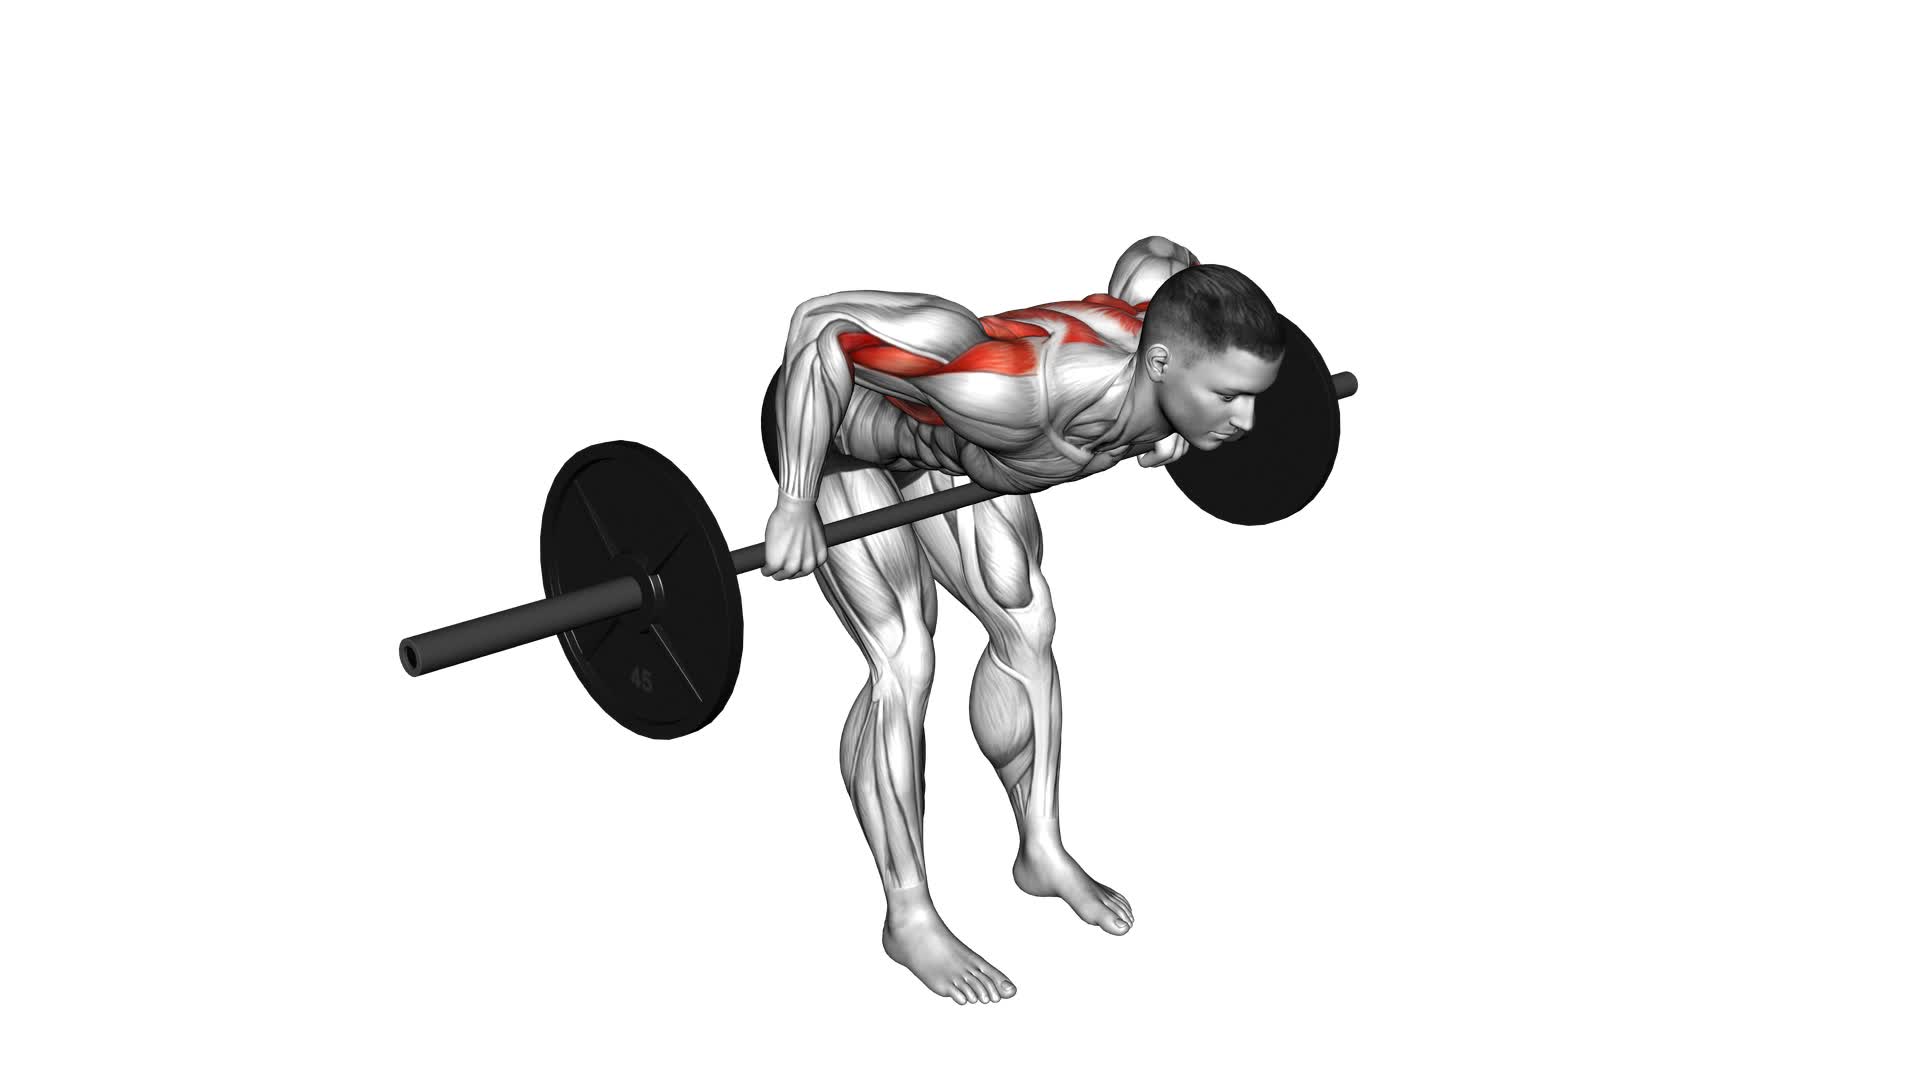 Barbell Bent Over Wide Grip Row - Video Exercise Guide & Tips